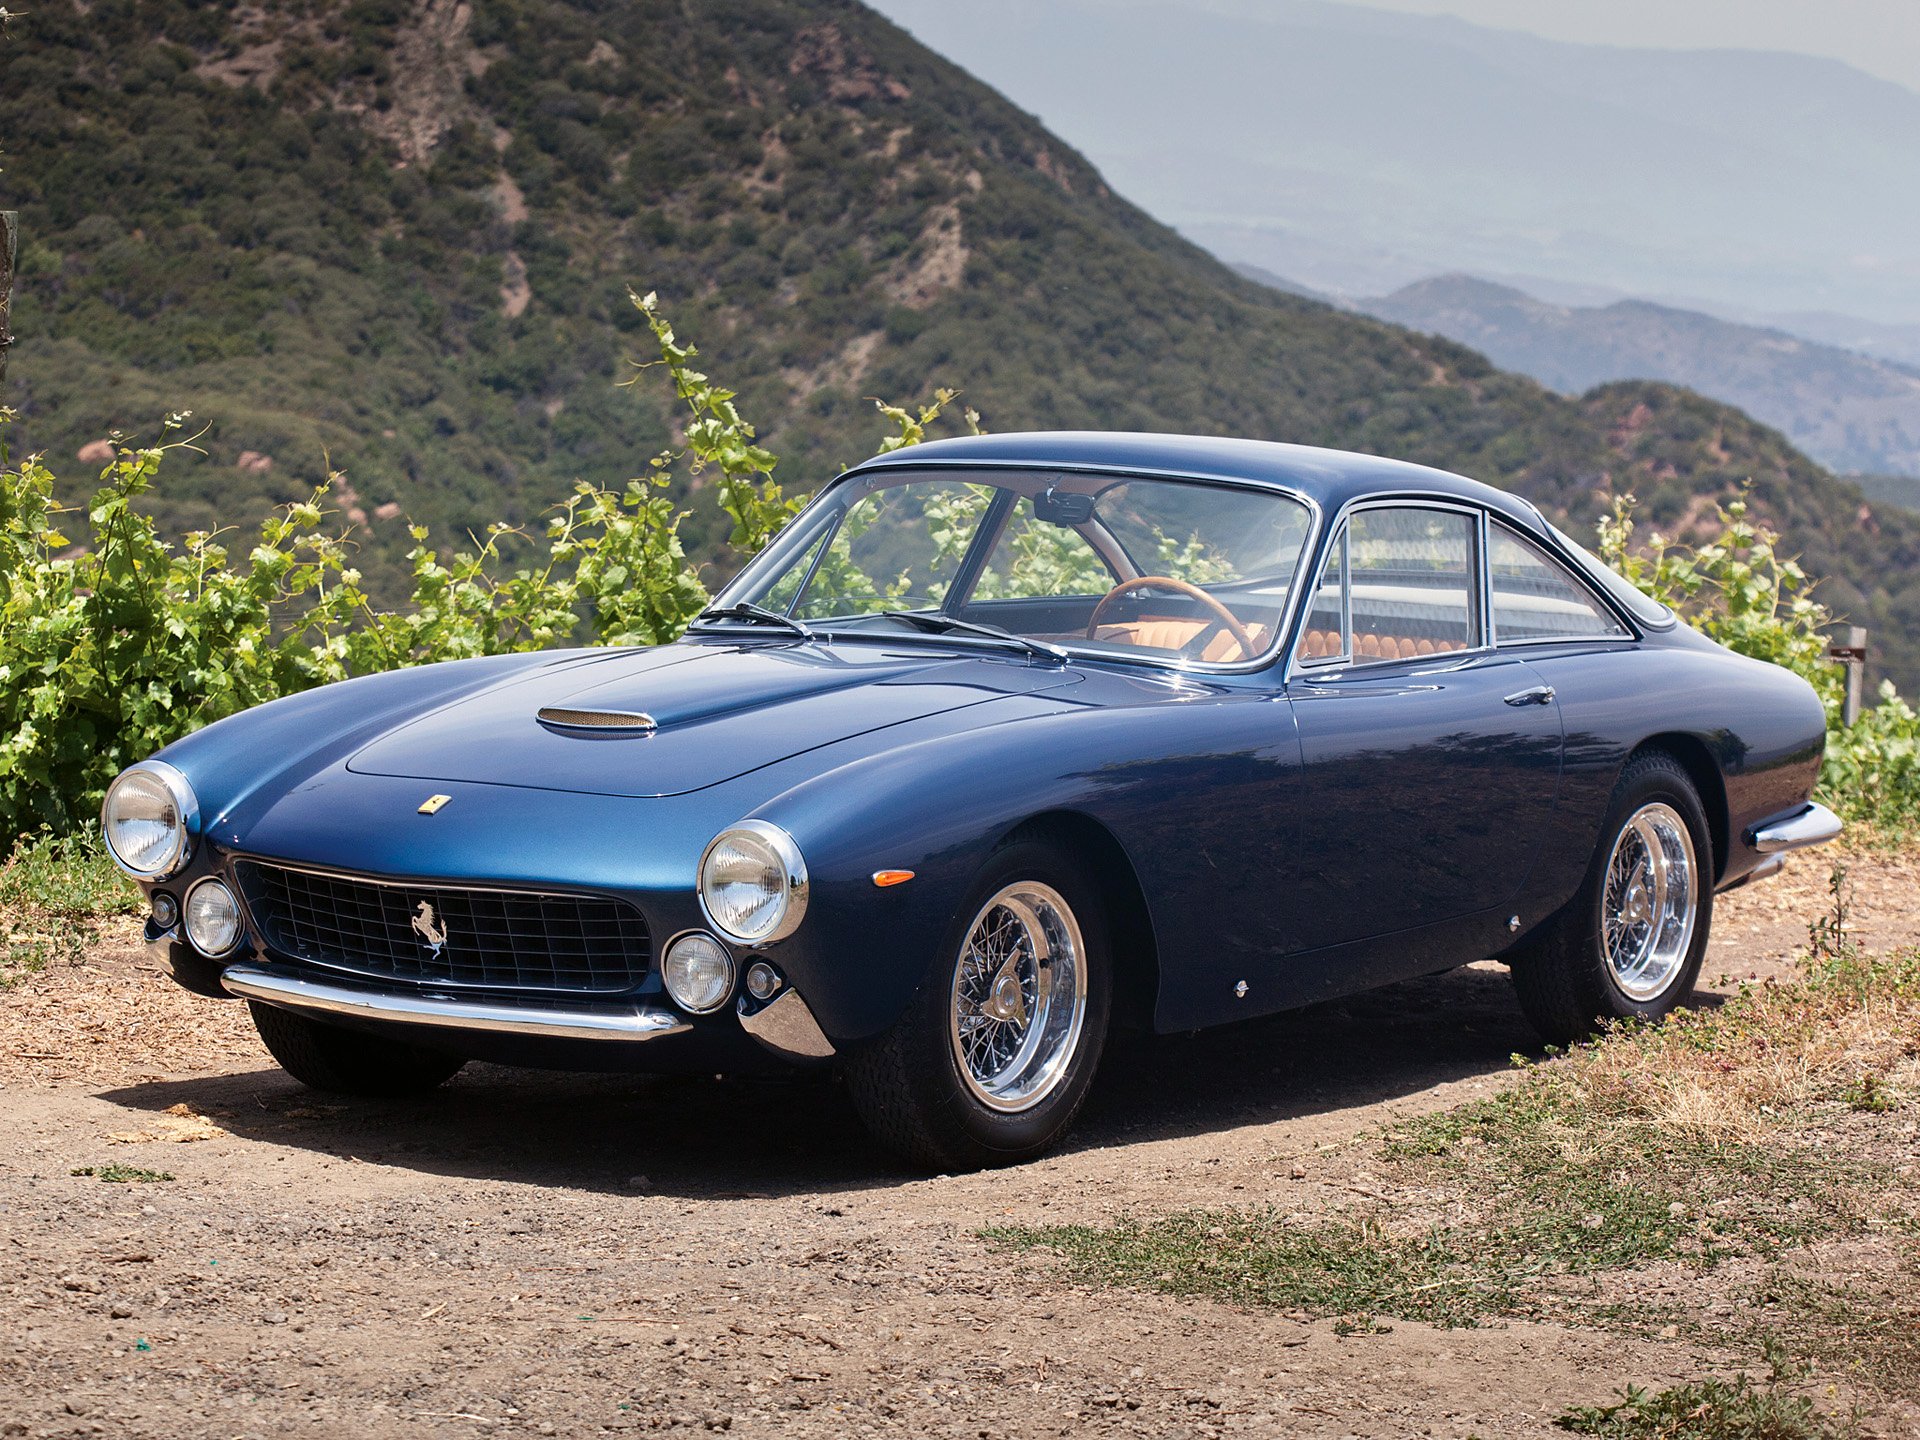 15 Dodge Carger Ferrari wallpaper black 250gt there are many  from 2004-2021 